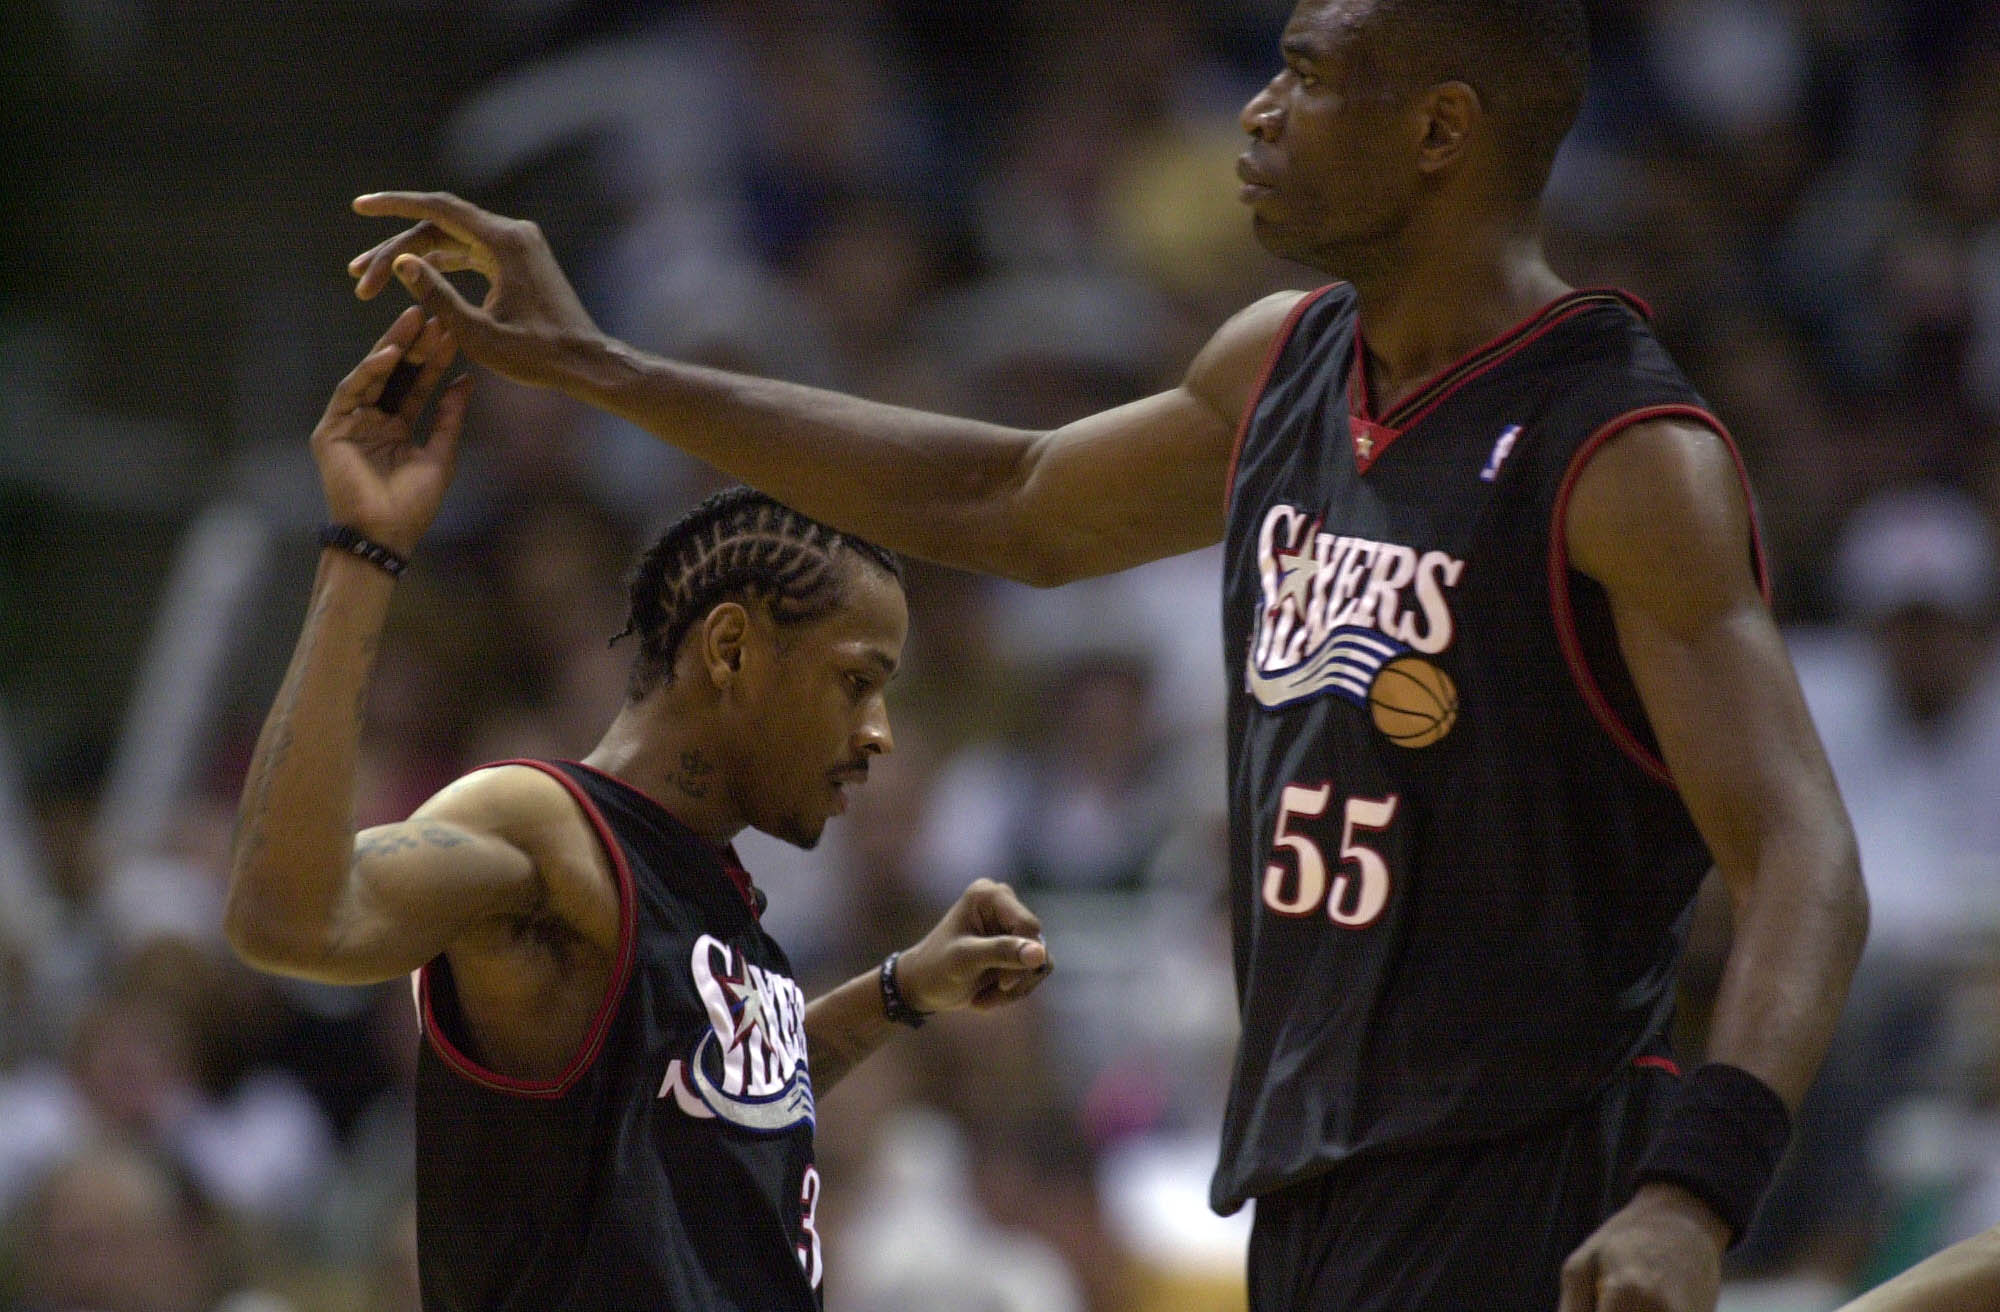 Dikembe Mutombo's size and interior defense helped to lift Allen Iverson to an MVP award and an appearance in the NBA Finals.